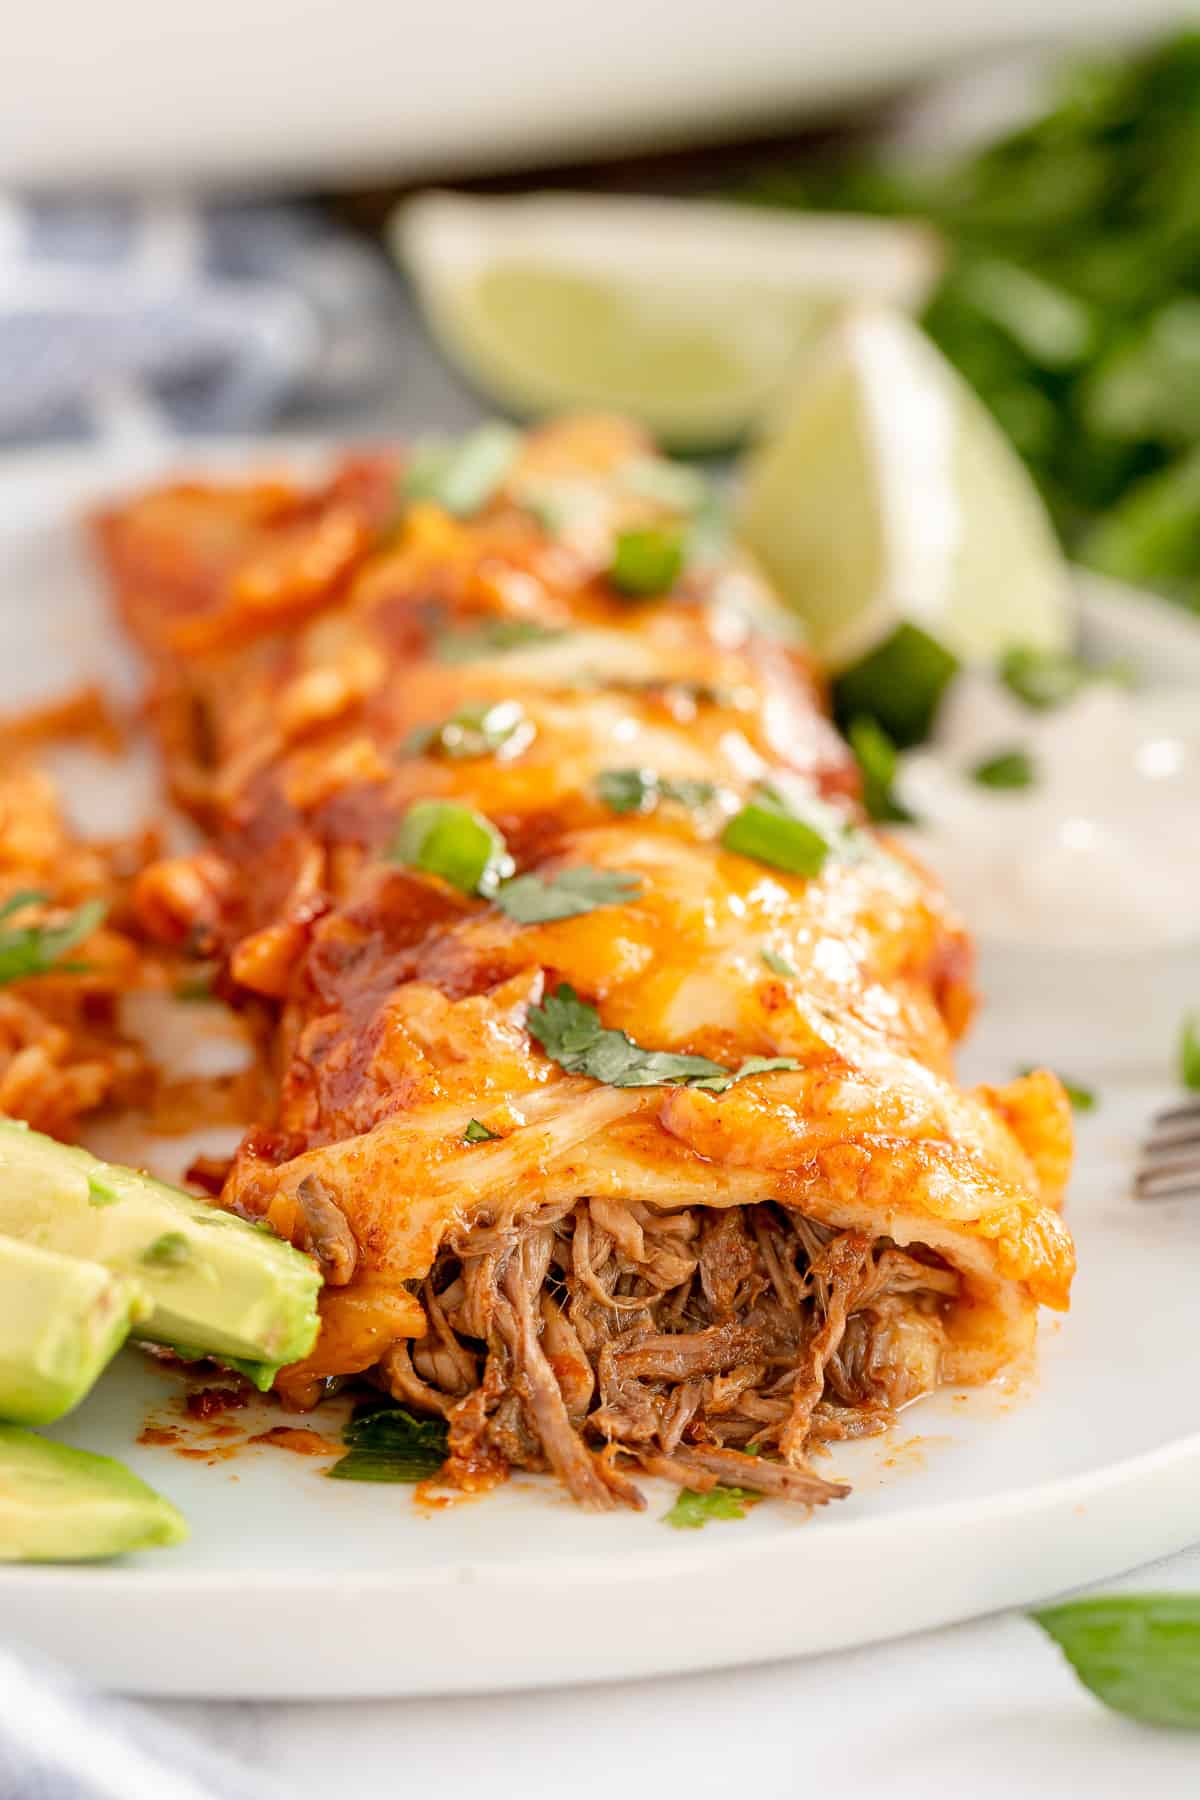 A shredded beef enchilada on a plate with Mexican rice.